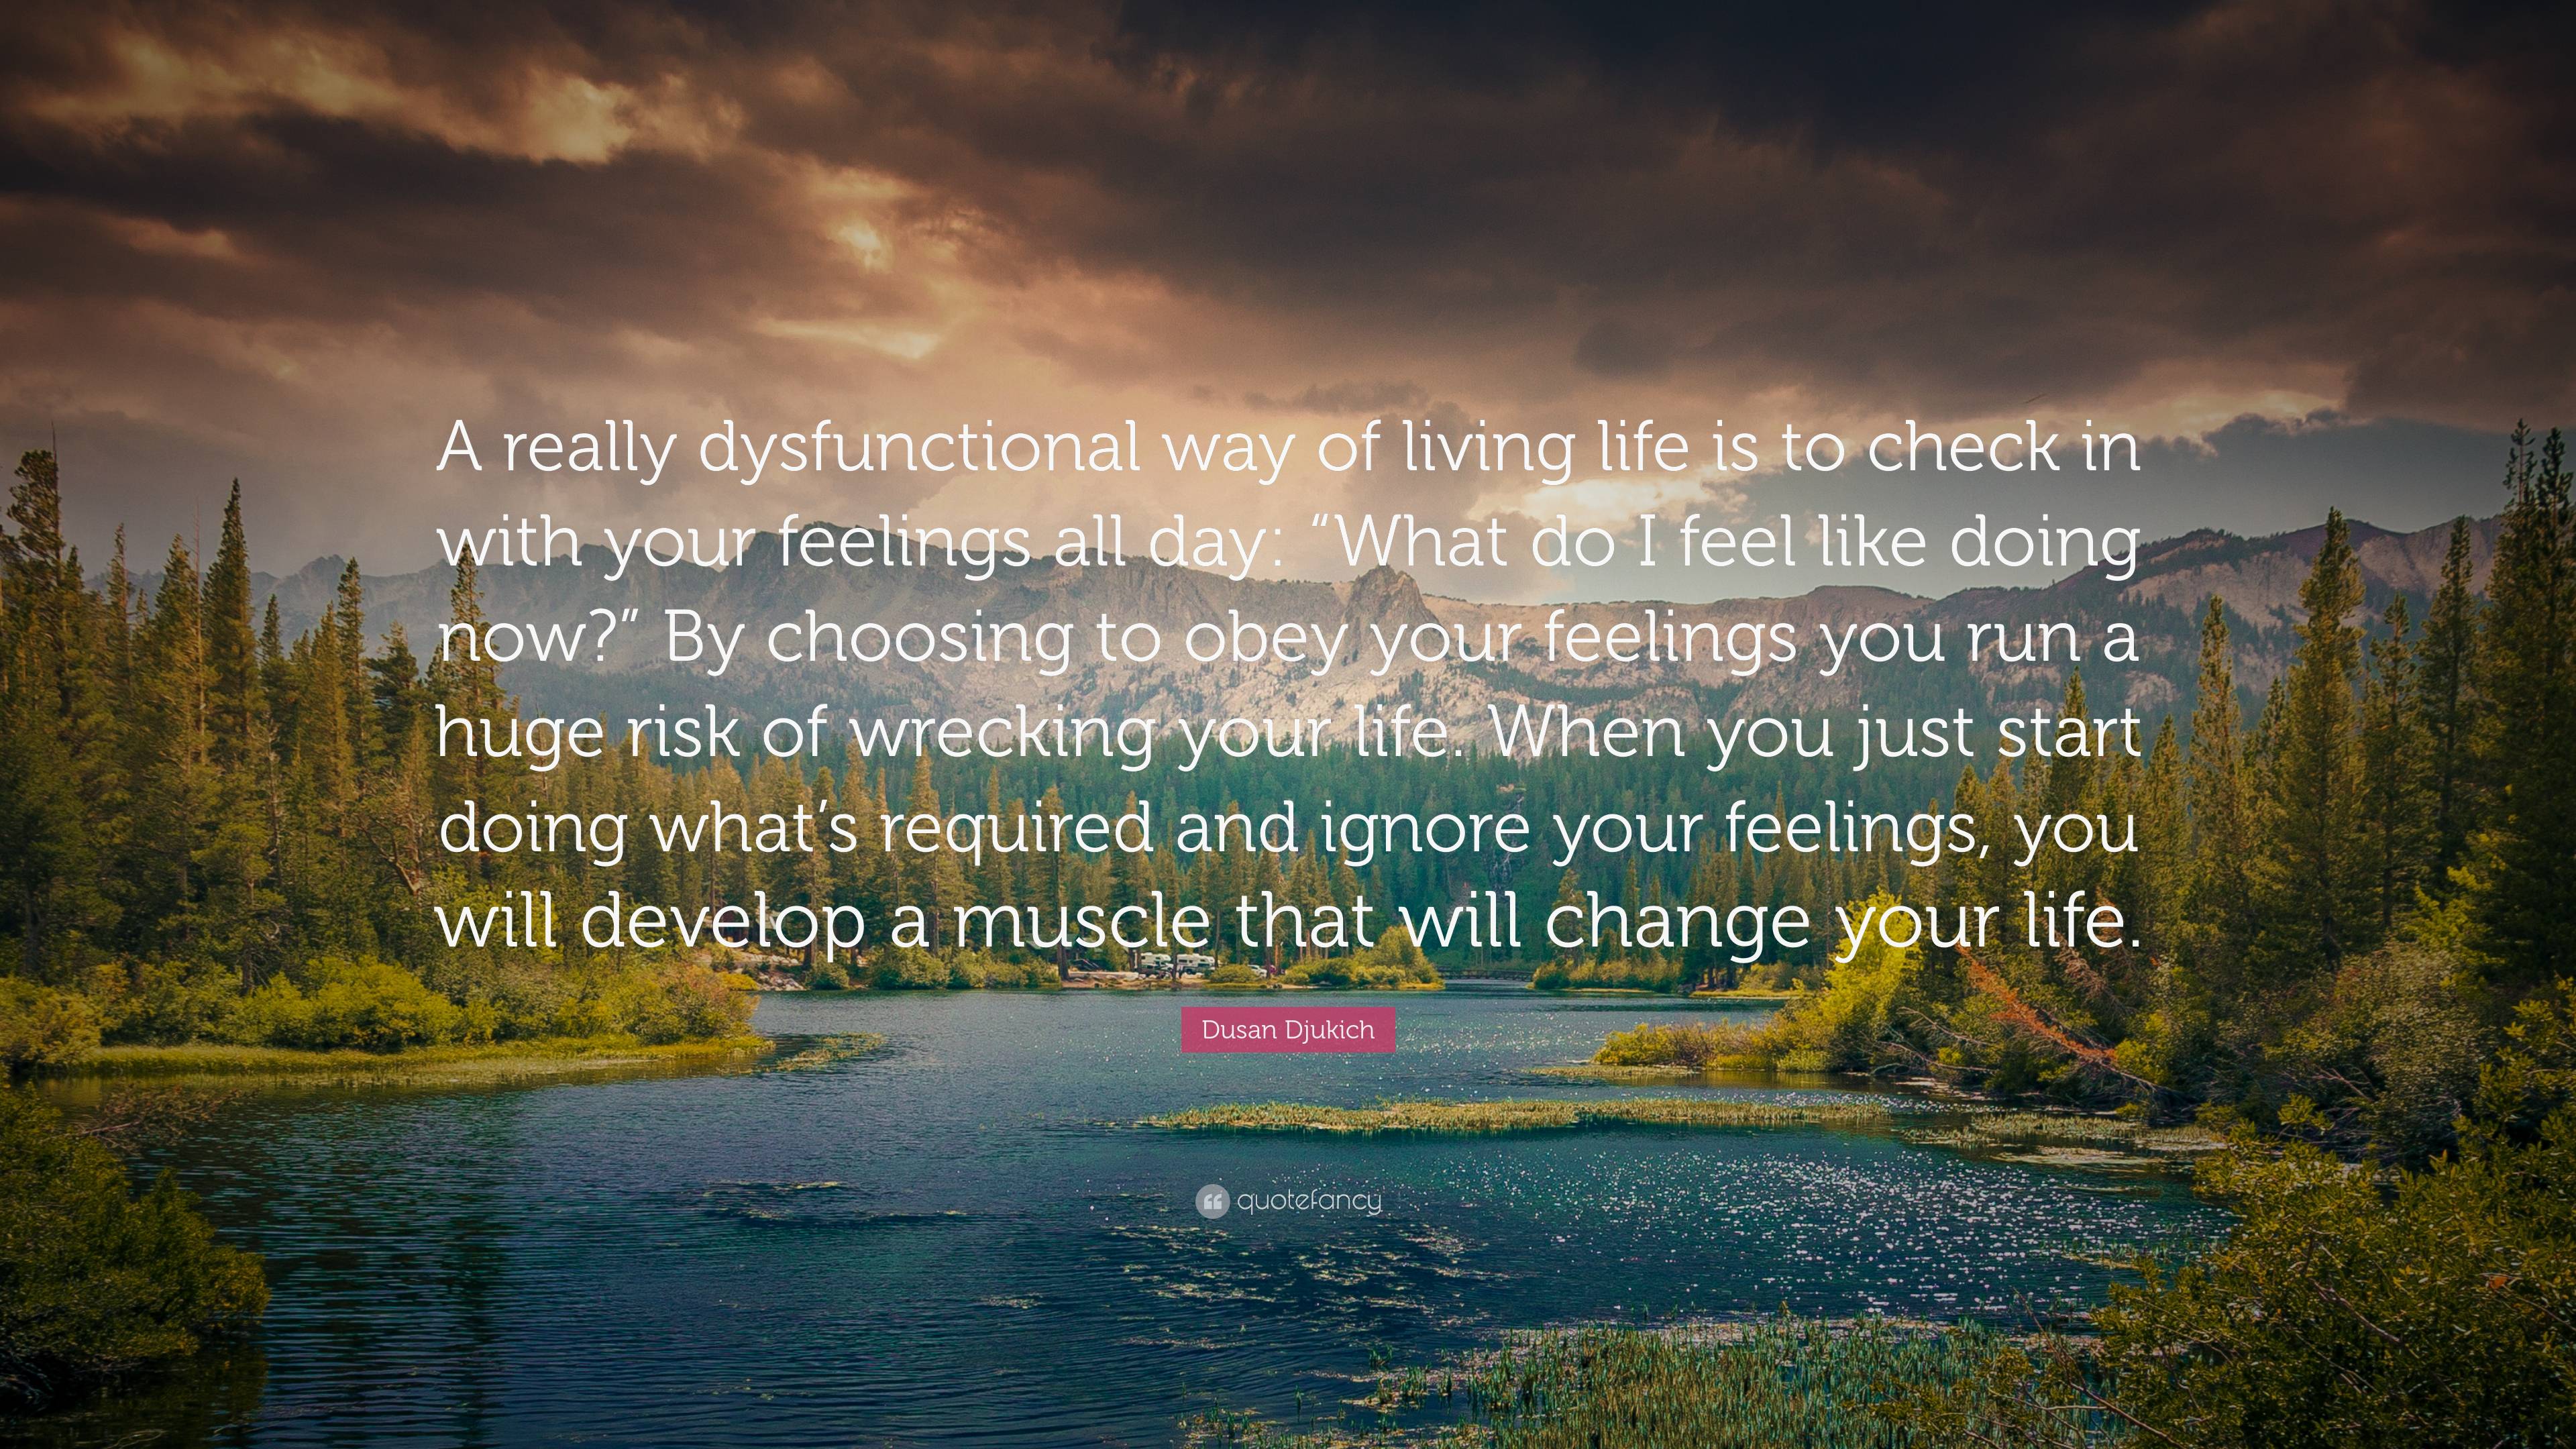 Dusan Djukich Quote: “A really dysfunctional way of living life is to ...